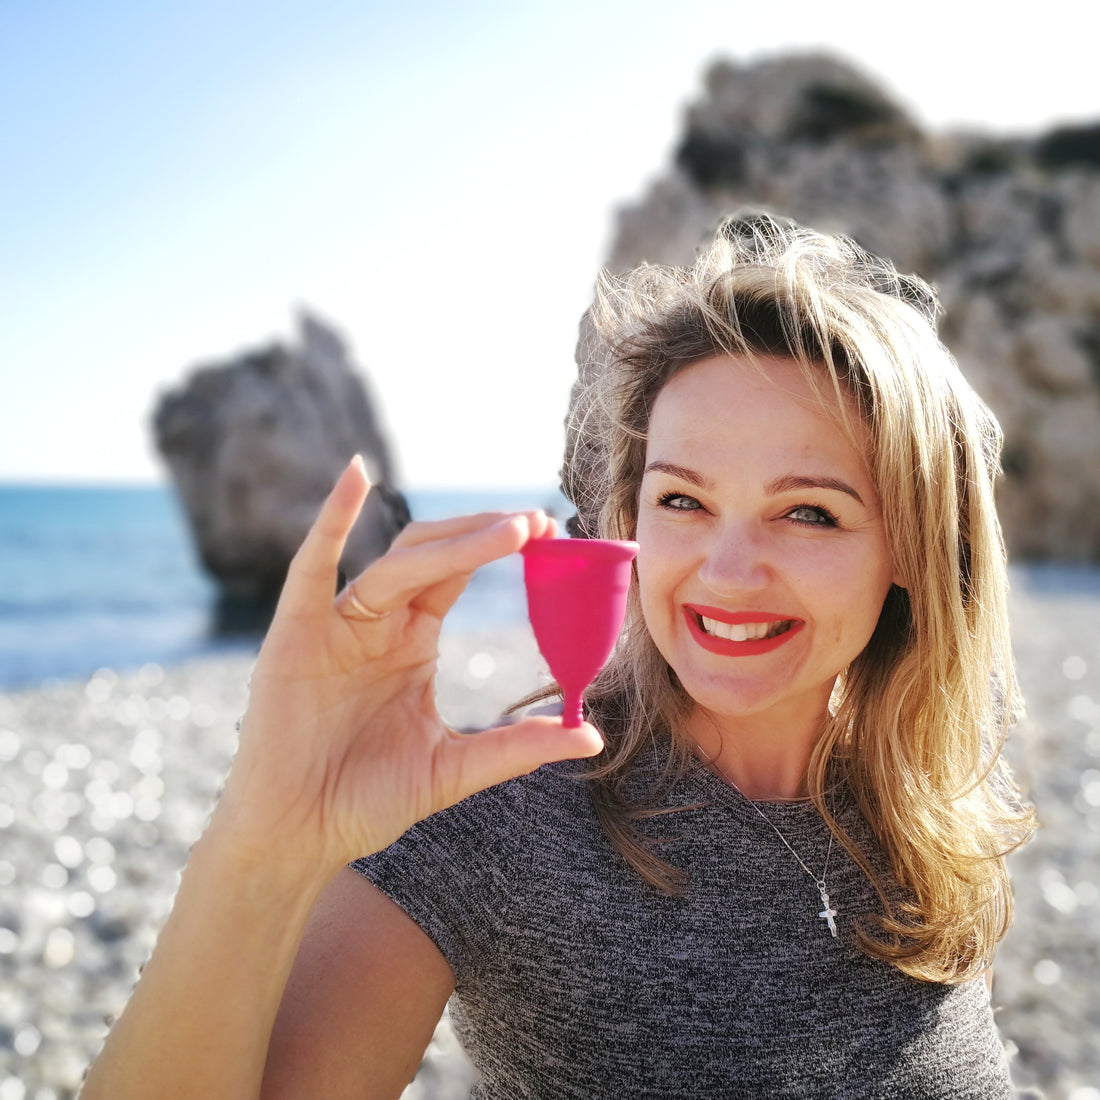 Summer is the Best Time to Try a Menstrual Cup